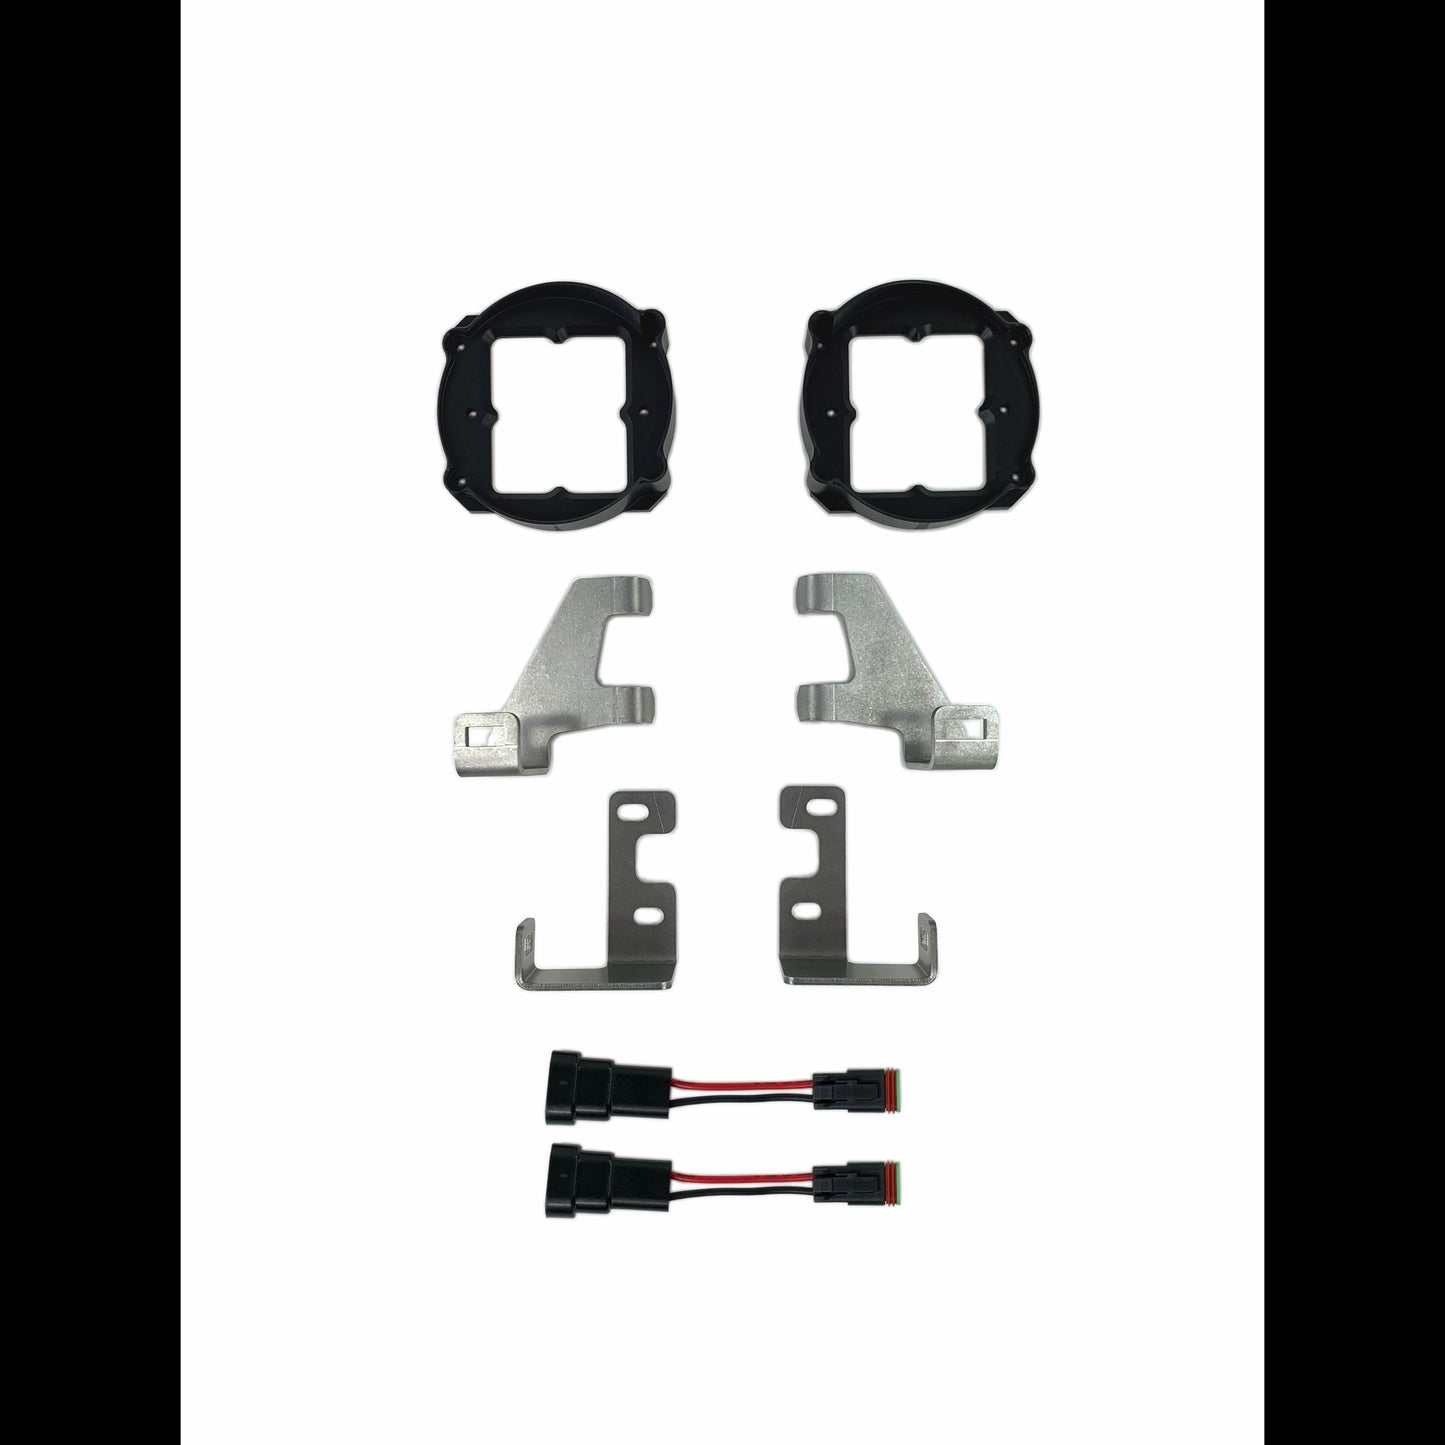 mounting hardware and brackets for toyota fog light kits